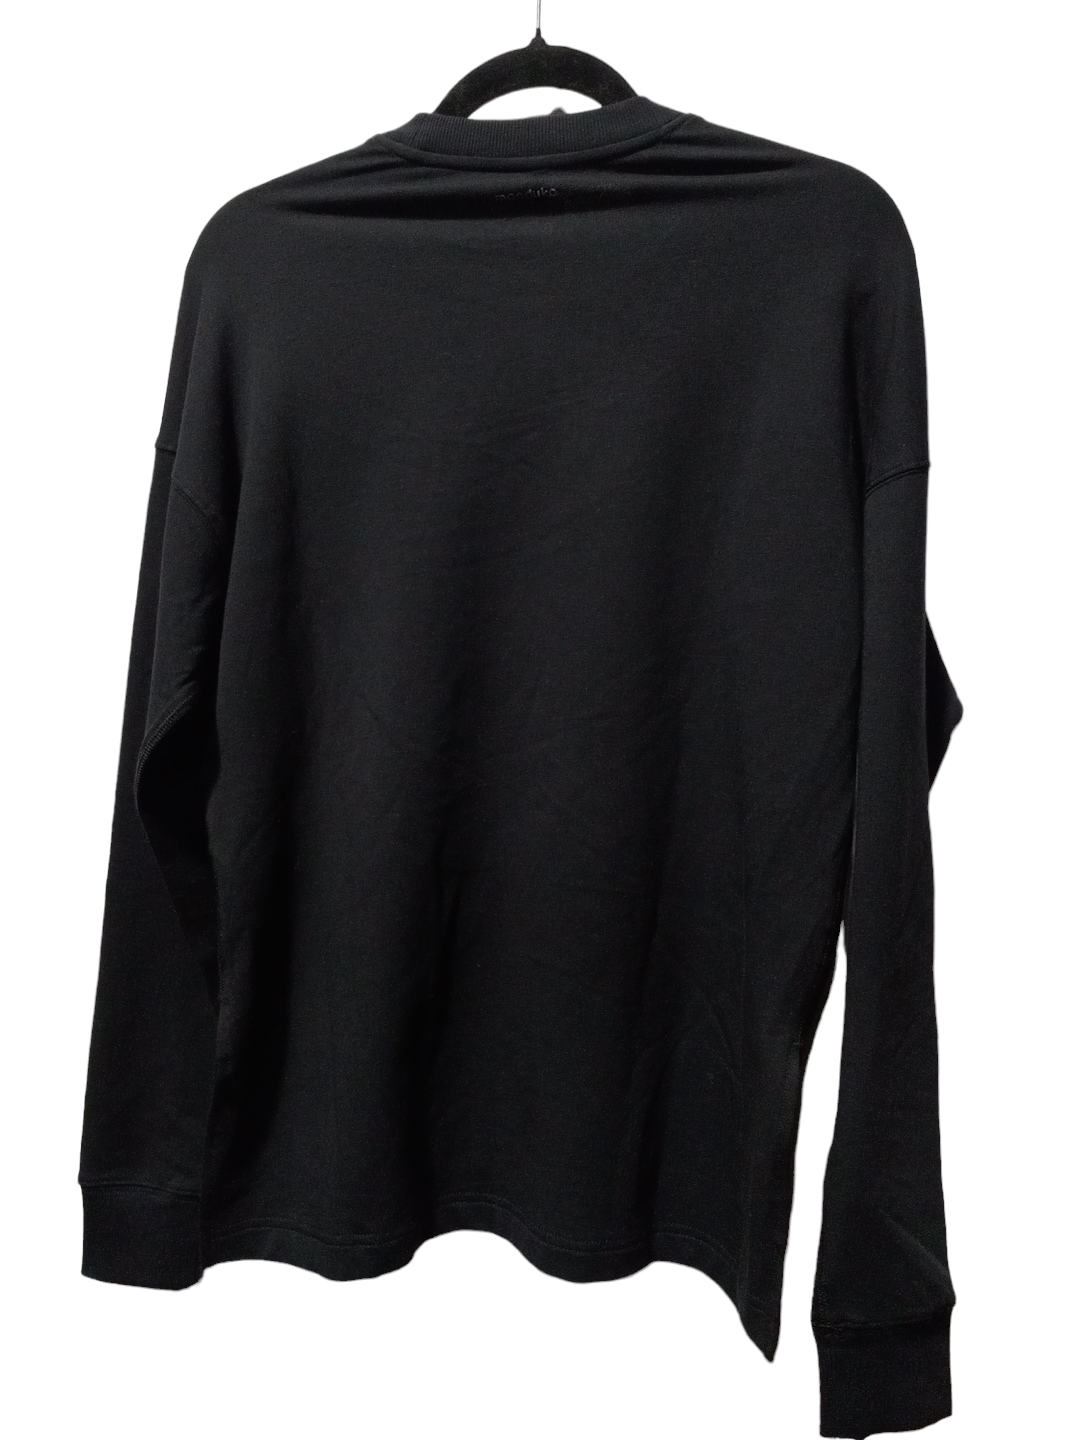 Black Athletic Top Long Sleeve Crewneck Clothes Mentor, Size S